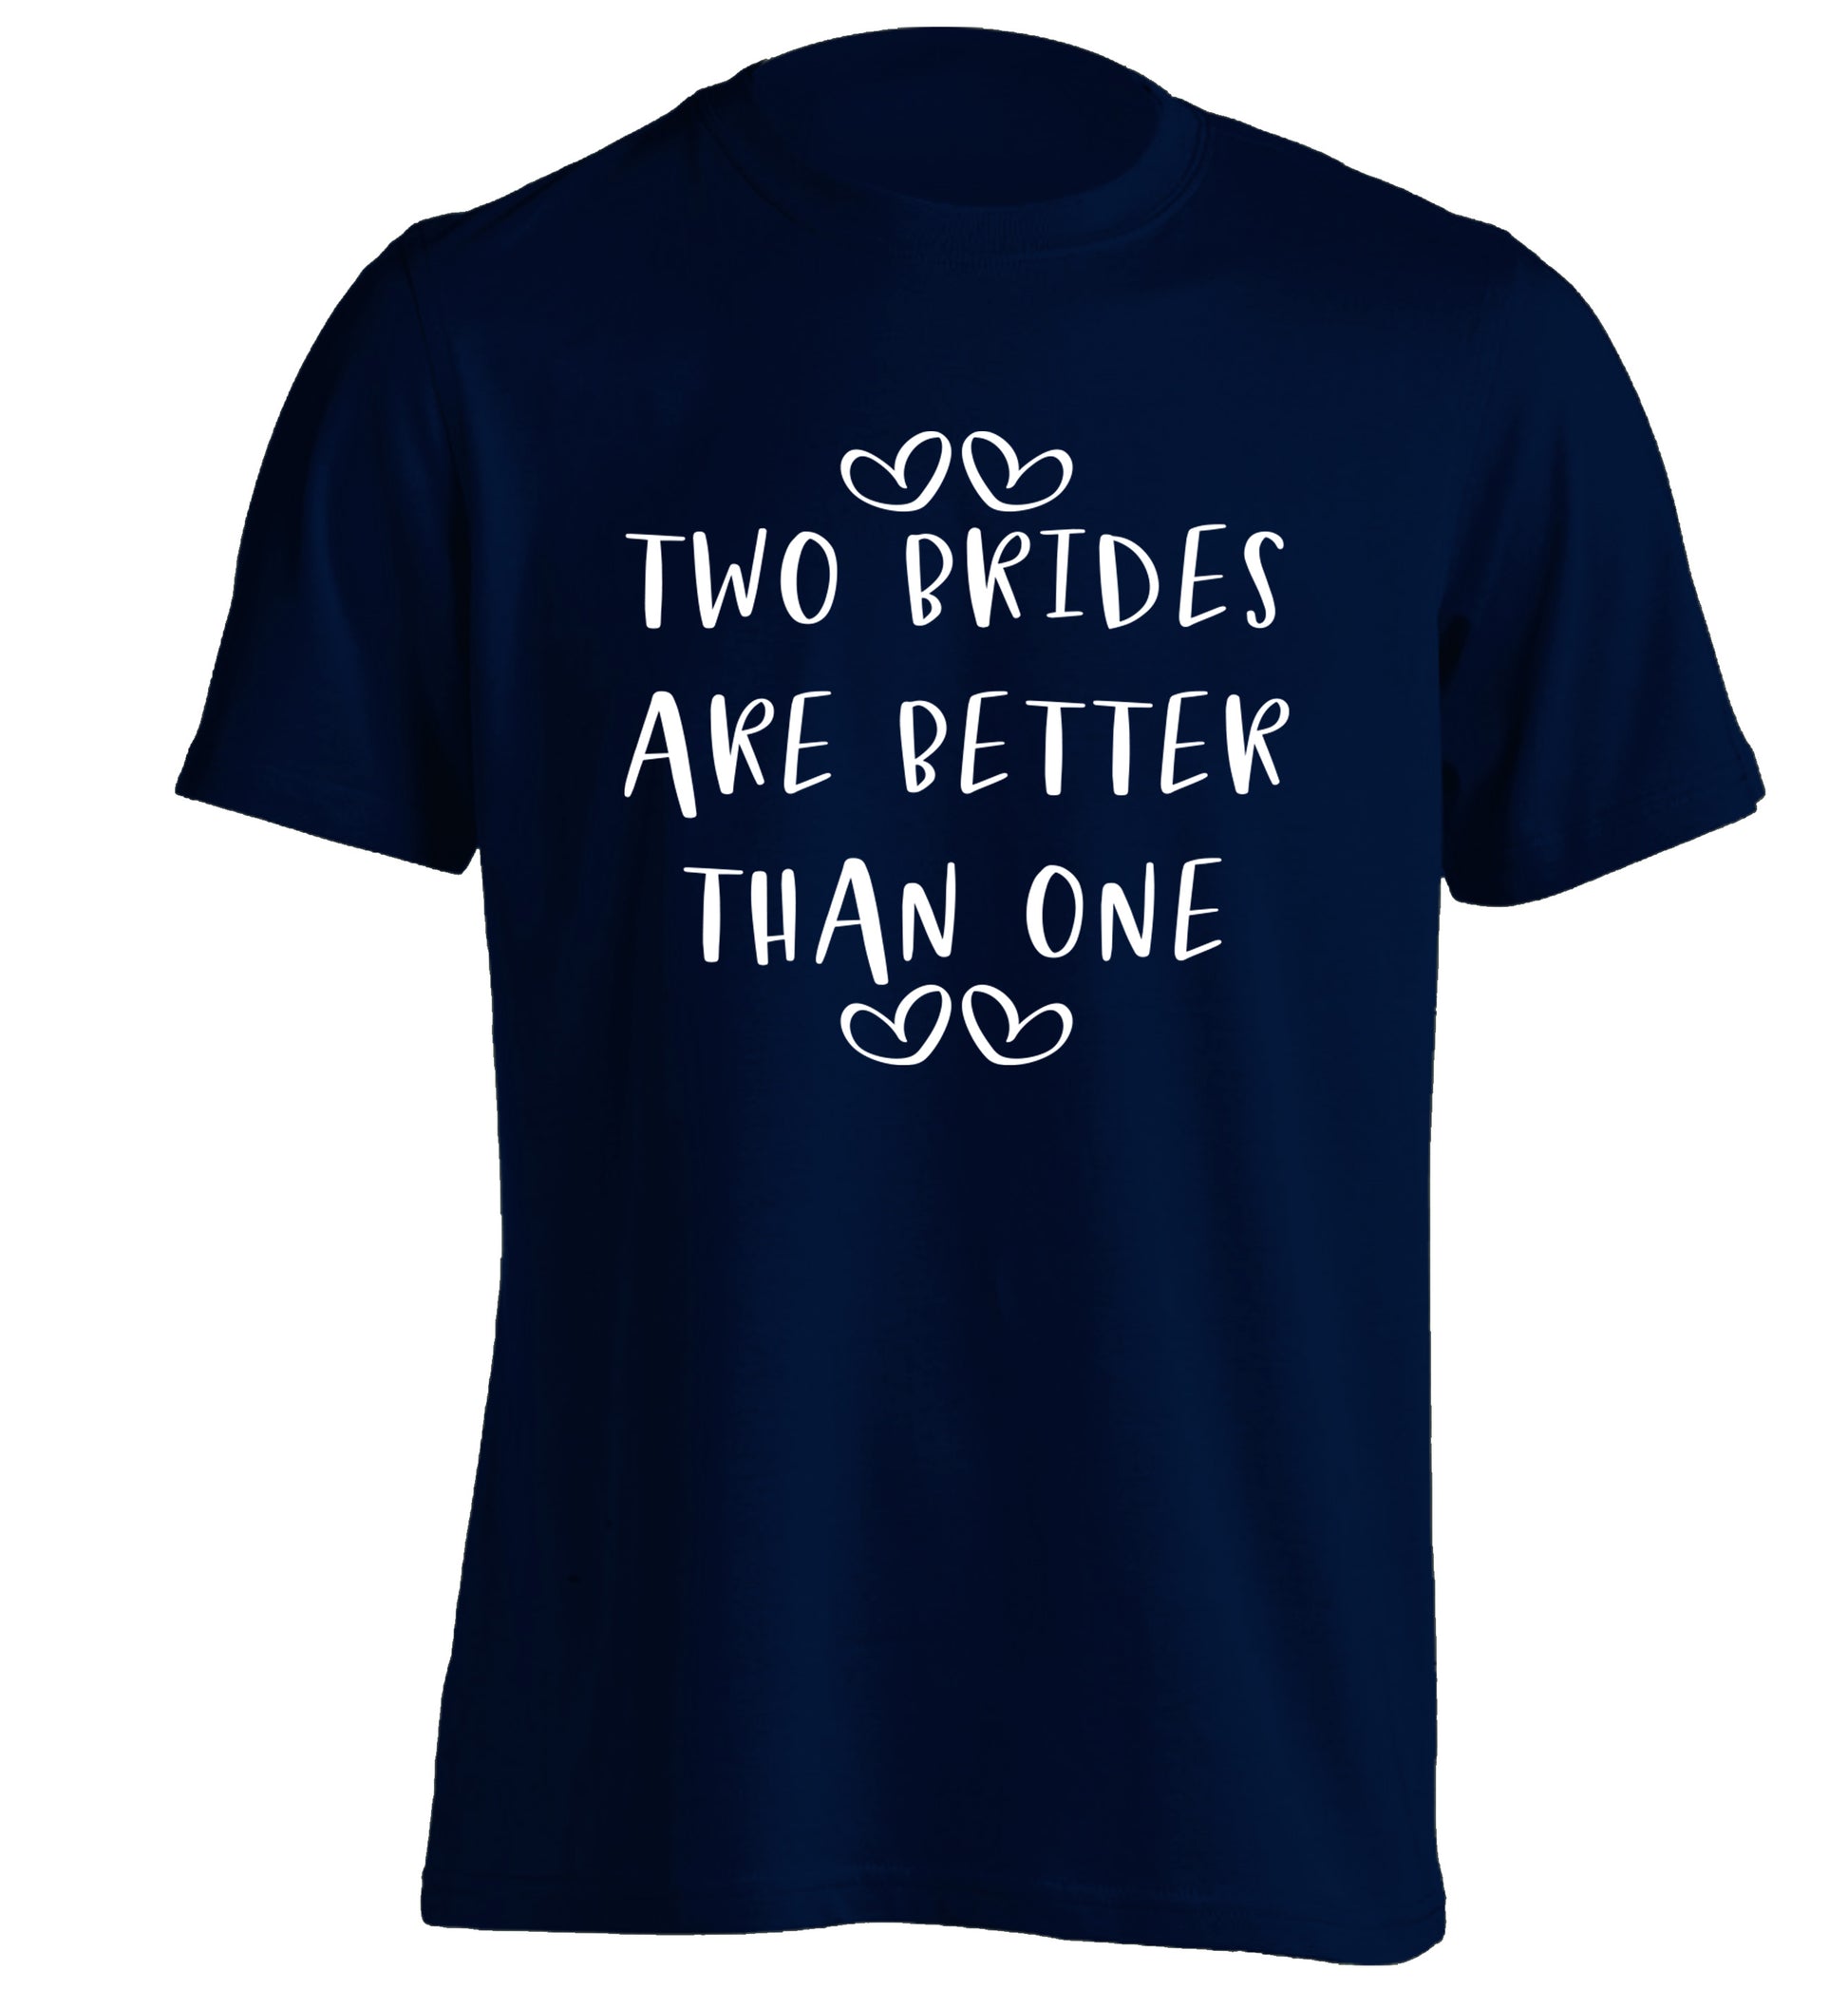 Two brides are better than one adults unisex navy Tshirt 2XL